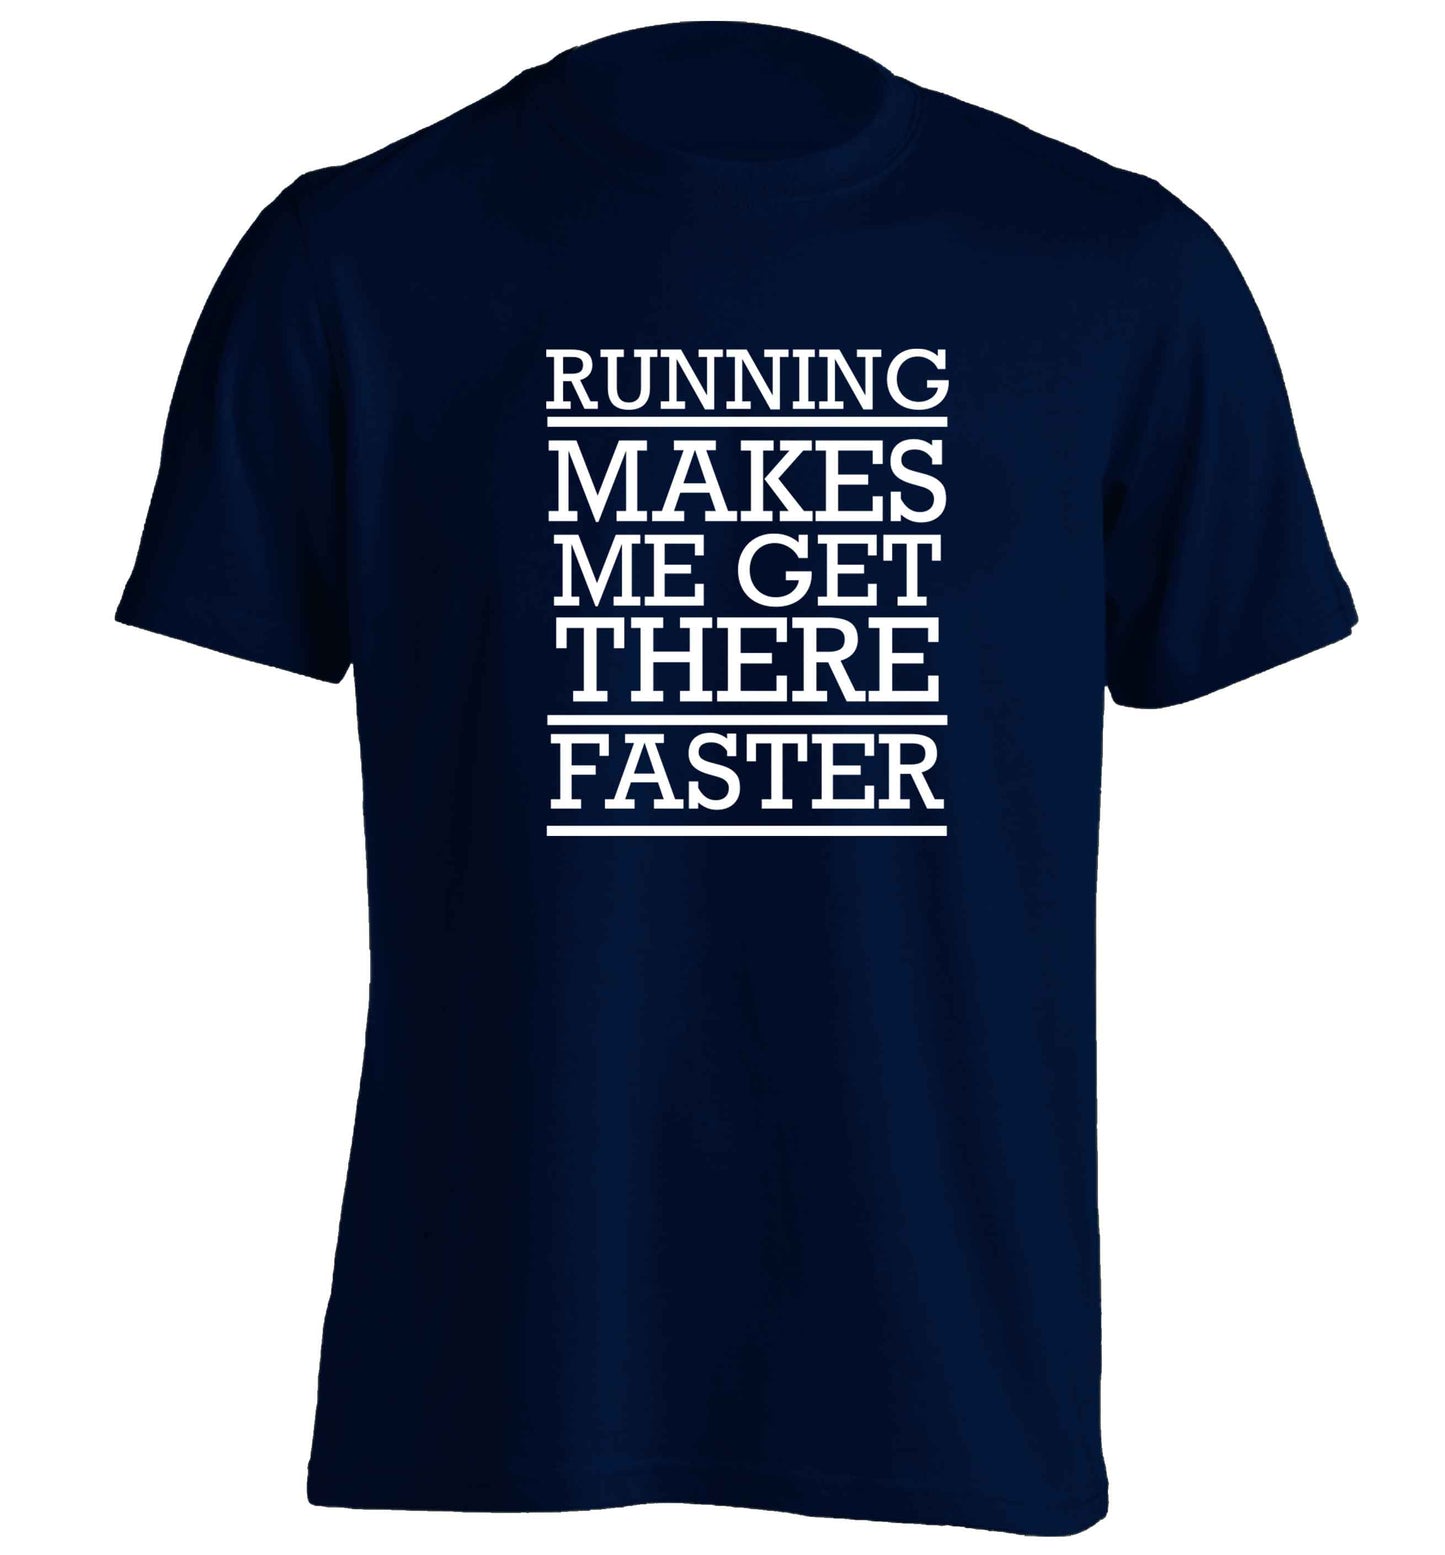 Running makes me get there faster adults unisex navy Tshirt 2XL